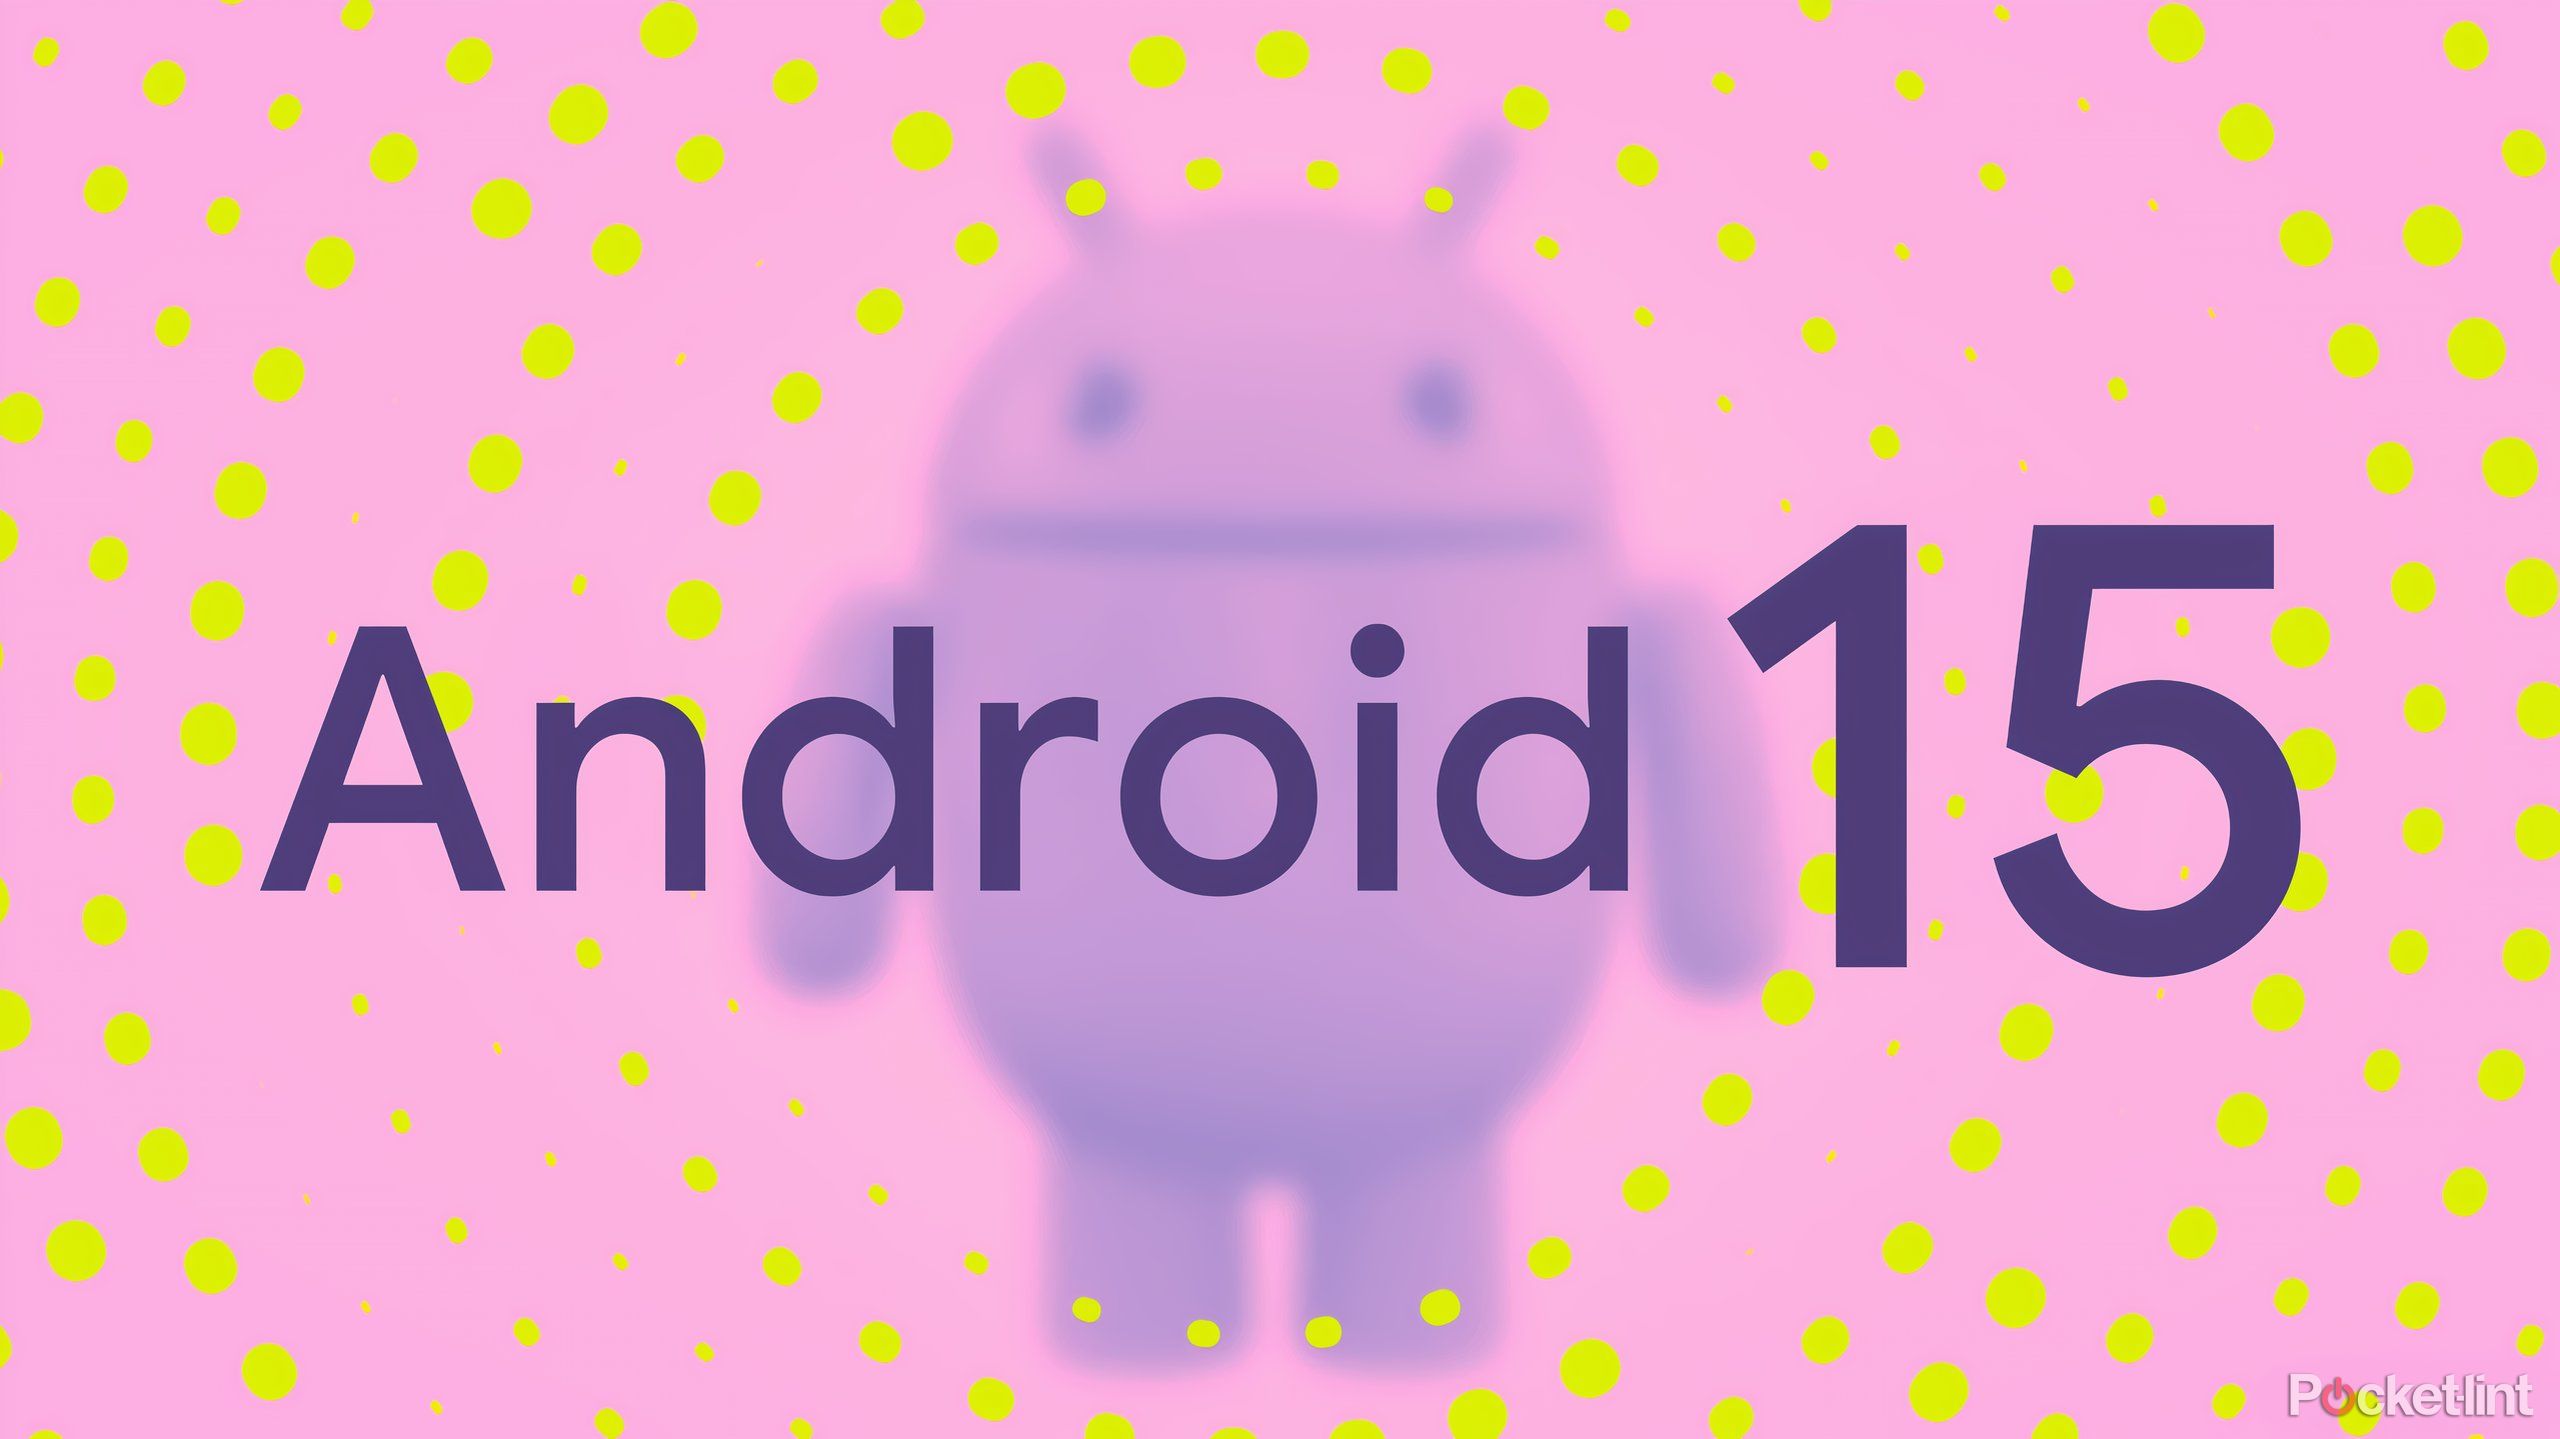 Android 15 art yellow dots on purple android logo